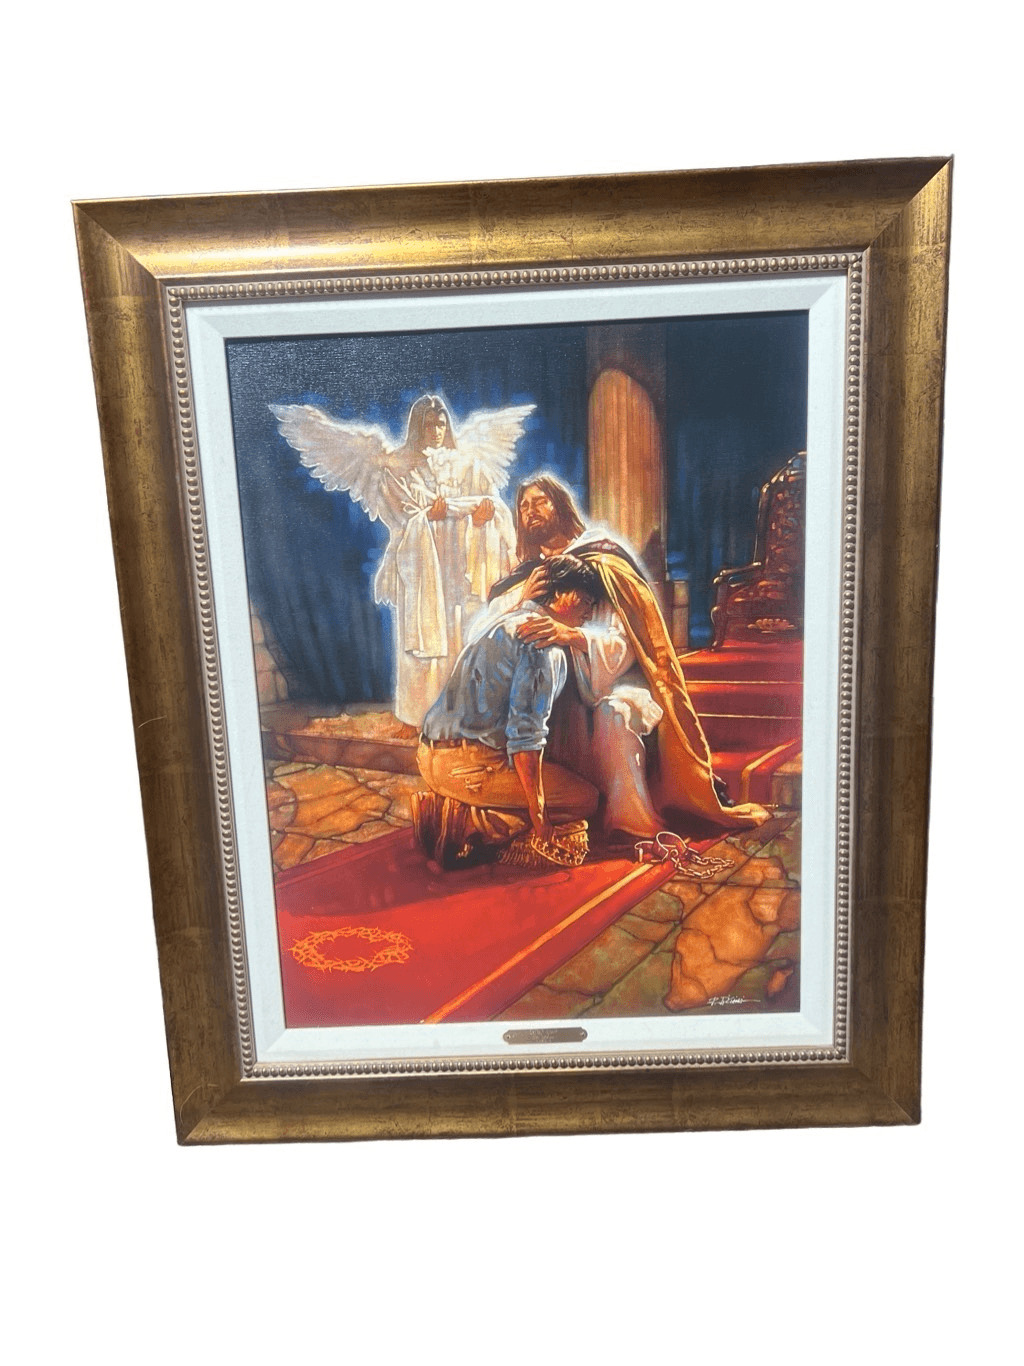 Ron DiCianni Safely Home 2006 Framed Art by Tapestry Production Artwork Picture